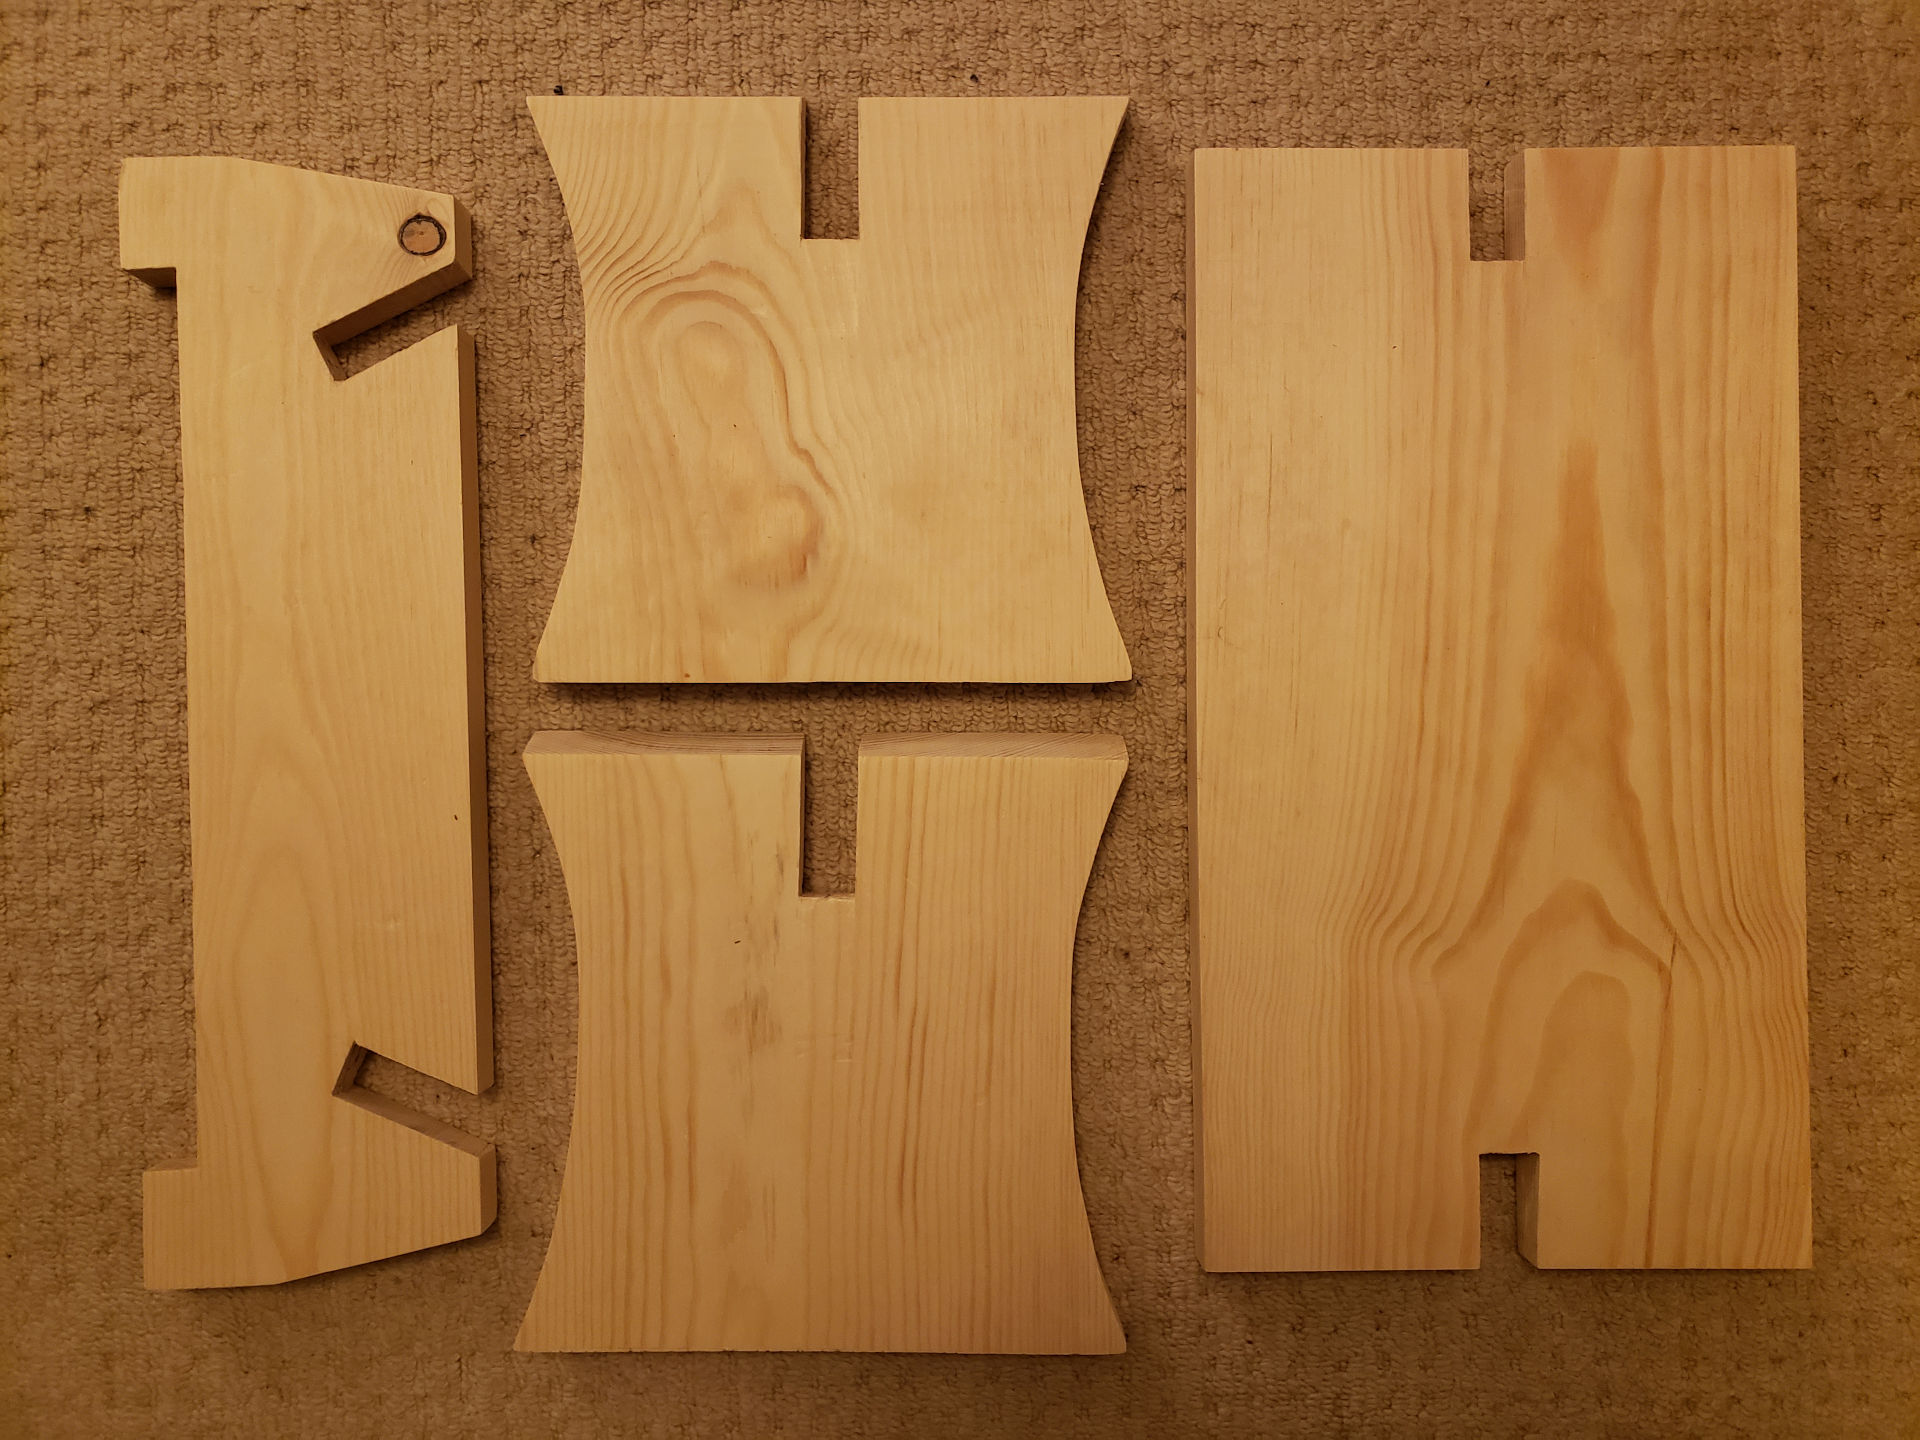 Stool pieces ready to slot together